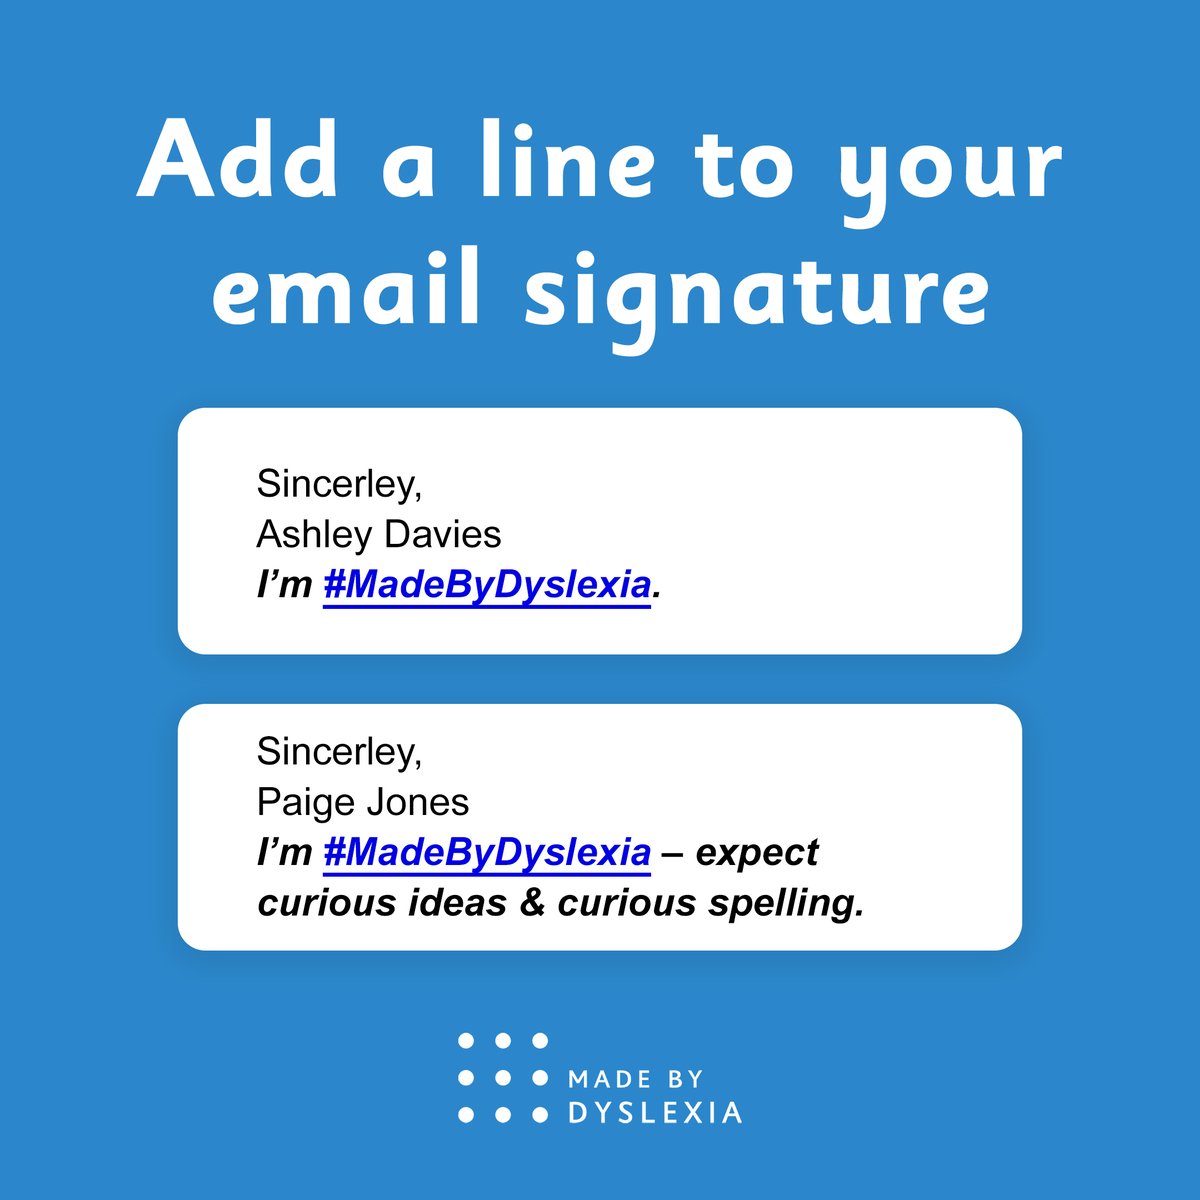 Dyslexic Thinking is now recognised by @LinkedIn as a vital skill in the workplace. But is it valued in your workplace? Add a line to your email signature & help your organisation to value the strengths & understand the challenges that come with your #DyslexicThinking.